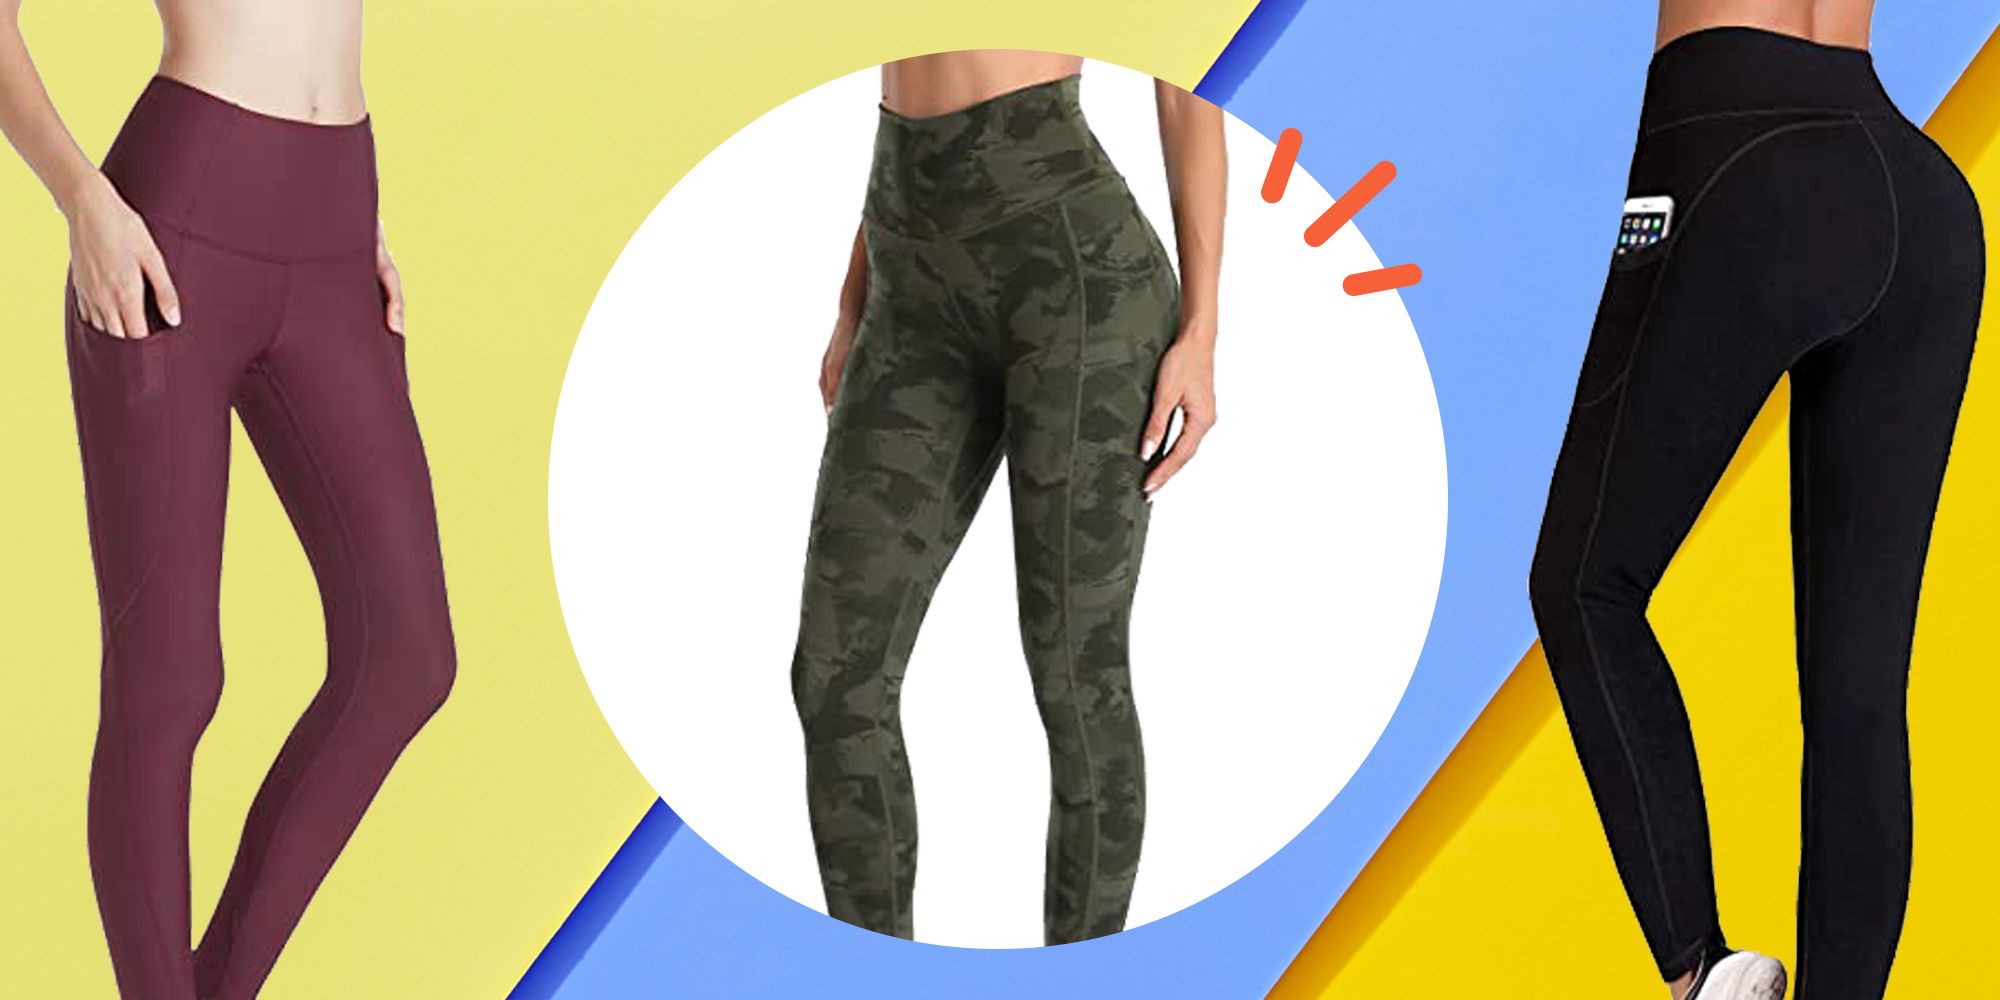 High Waist Yoga Pants Womens Leggings with Side/Hidden Pocket Series Running Compression 7/13 Workout Pants